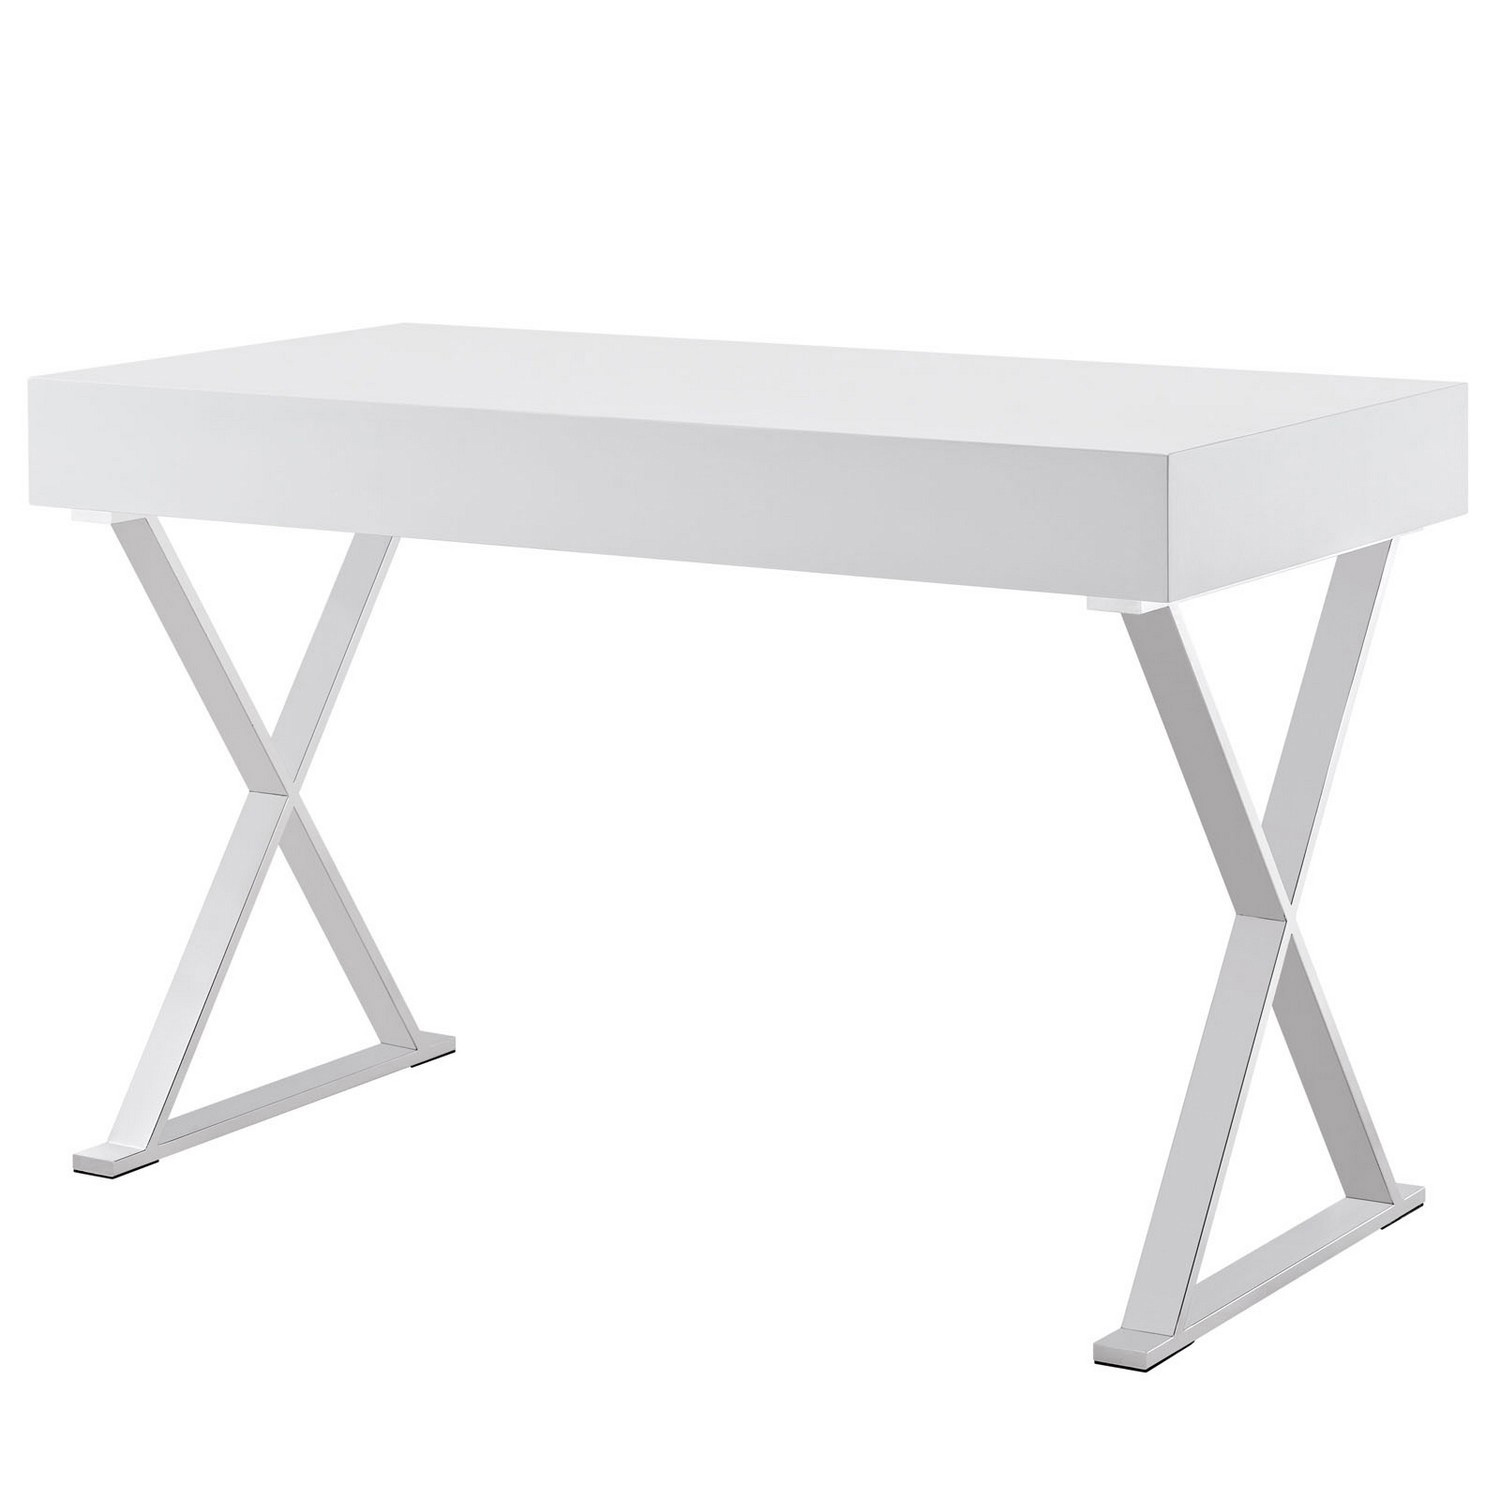 Modway Sector Office Desk - White